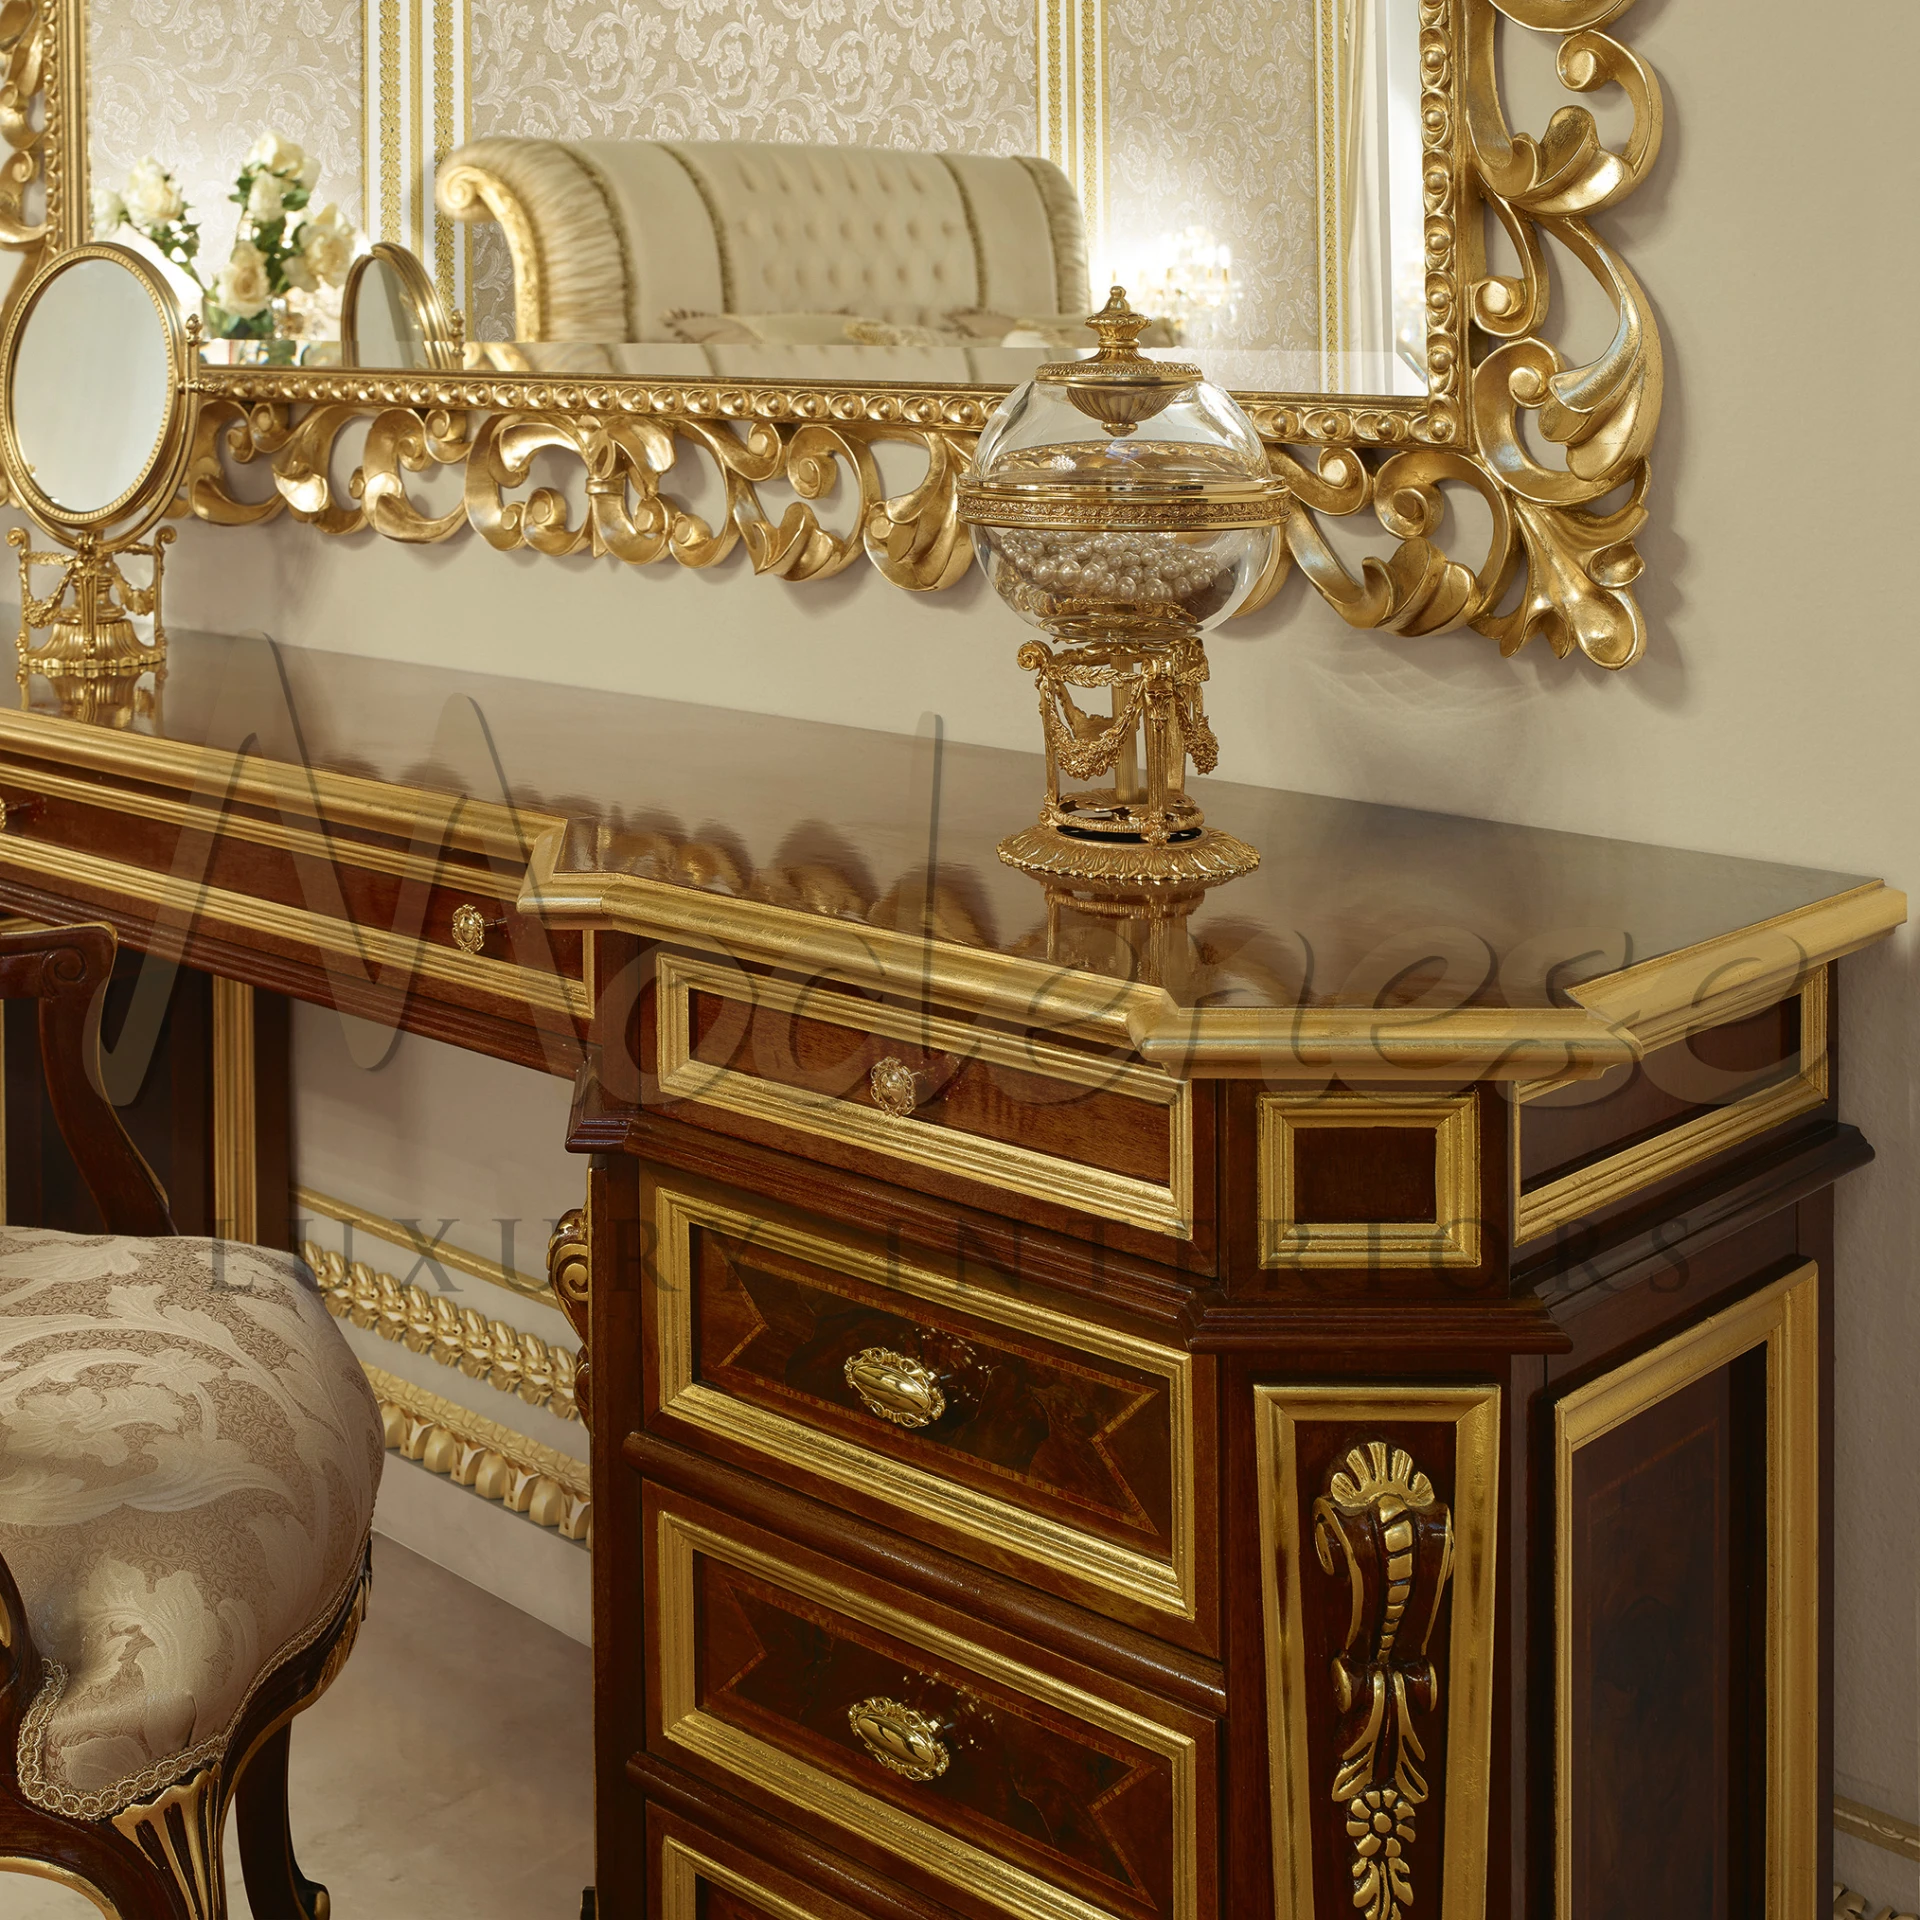 Close-up of a luxurious dressing table with a glossy golden trim, intricate woodwork, and an ornate mirror, featuring a glass candy jar as an elegant accessory.